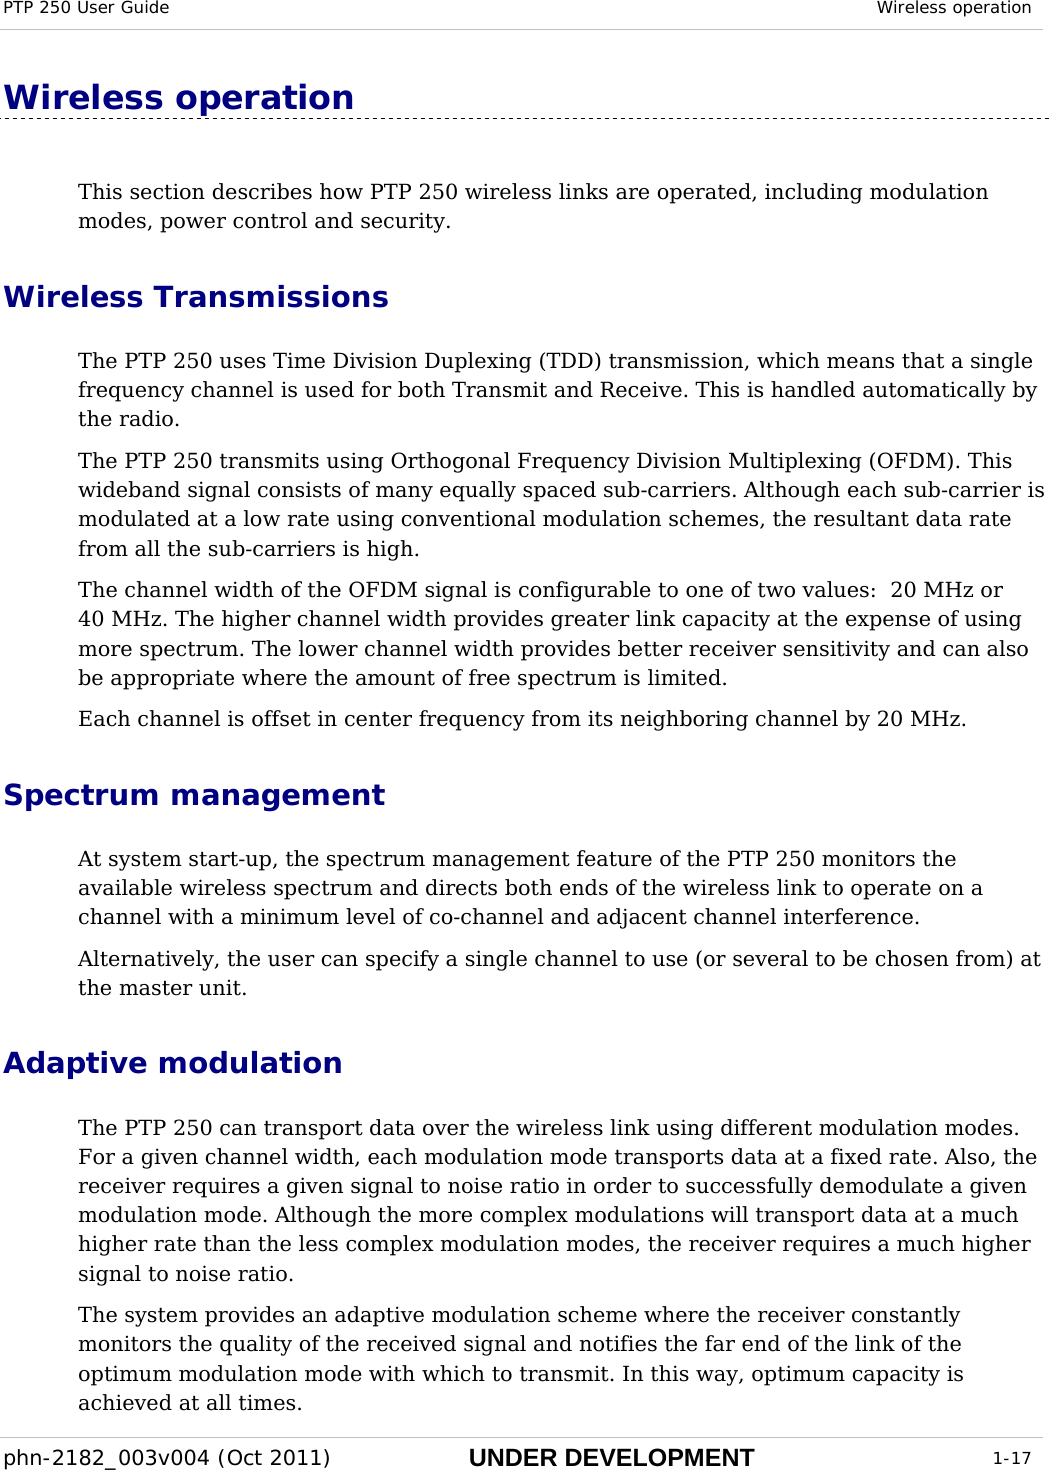 PTP 250 User Guide  Wireless operation  phn-2182_003v004 (Oct 2011)  UNDER DEVELOPMENT  1-17  Wireless operation This section describes how PTP 250 wireless links are operated, including modulation modes, power control and security. Wireless Transmissions  The PTP 250 uses Time Division Duplexing (TDD) transmission, which means that a single frequency channel is used for both Transmit and Receive. This is handled automatically by the radio. The PTP 250 transmits using Orthogonal Frequency Division Multiplexing (OFDM). This wideband signal consists of many equally spaced sub-carriers. Although each sub-carrier is modulated at a low rate using conventional modulation schemes, the resultant data rate from all the sub-carriers is high.  The channel width of the OFDM signal is configurable to one of two values:  20 MHz or 40 MHz. The higher channel width provides greater link capacity at the expense of using more spectrum. The lower channel width provides better receiver sensitivity and can also be appropriate where the amount of free spectrum is limited. Each channel is offset in center frequency from its neighboring channel by 20 MHz. Spectrum management At system start-up, the spectrum management feature of the PTP 250 monitors the available wireless spectrum and directs both ends of the wireless link to operate on a channel with a minimum level of co-channel and adjacent channel interference.  Alternatively, the user can specify a single channel to use (or several to be chosen from) at the master unit. Adaptive modulation The PTP 250 can transport data over the wireless link using different modulation modes. For a given channel width, each modulation mode transports data at a fixed rate. Also, the receiver requires a given signal to noise ratio in order to successfully demodulate a given modulation mode. Although the more complex modulations will transport data at a much higher rate than the less complex modulation modes, the receiver requires a much higher signal to noise ratio. The system provides an adaptive modulation scheme where the receiver constantly monitors the quality of the received signal and notifies the far end of the link of the optimum modulation mode with which to transmit. In this way, optimum capacity is achieved at all times.  